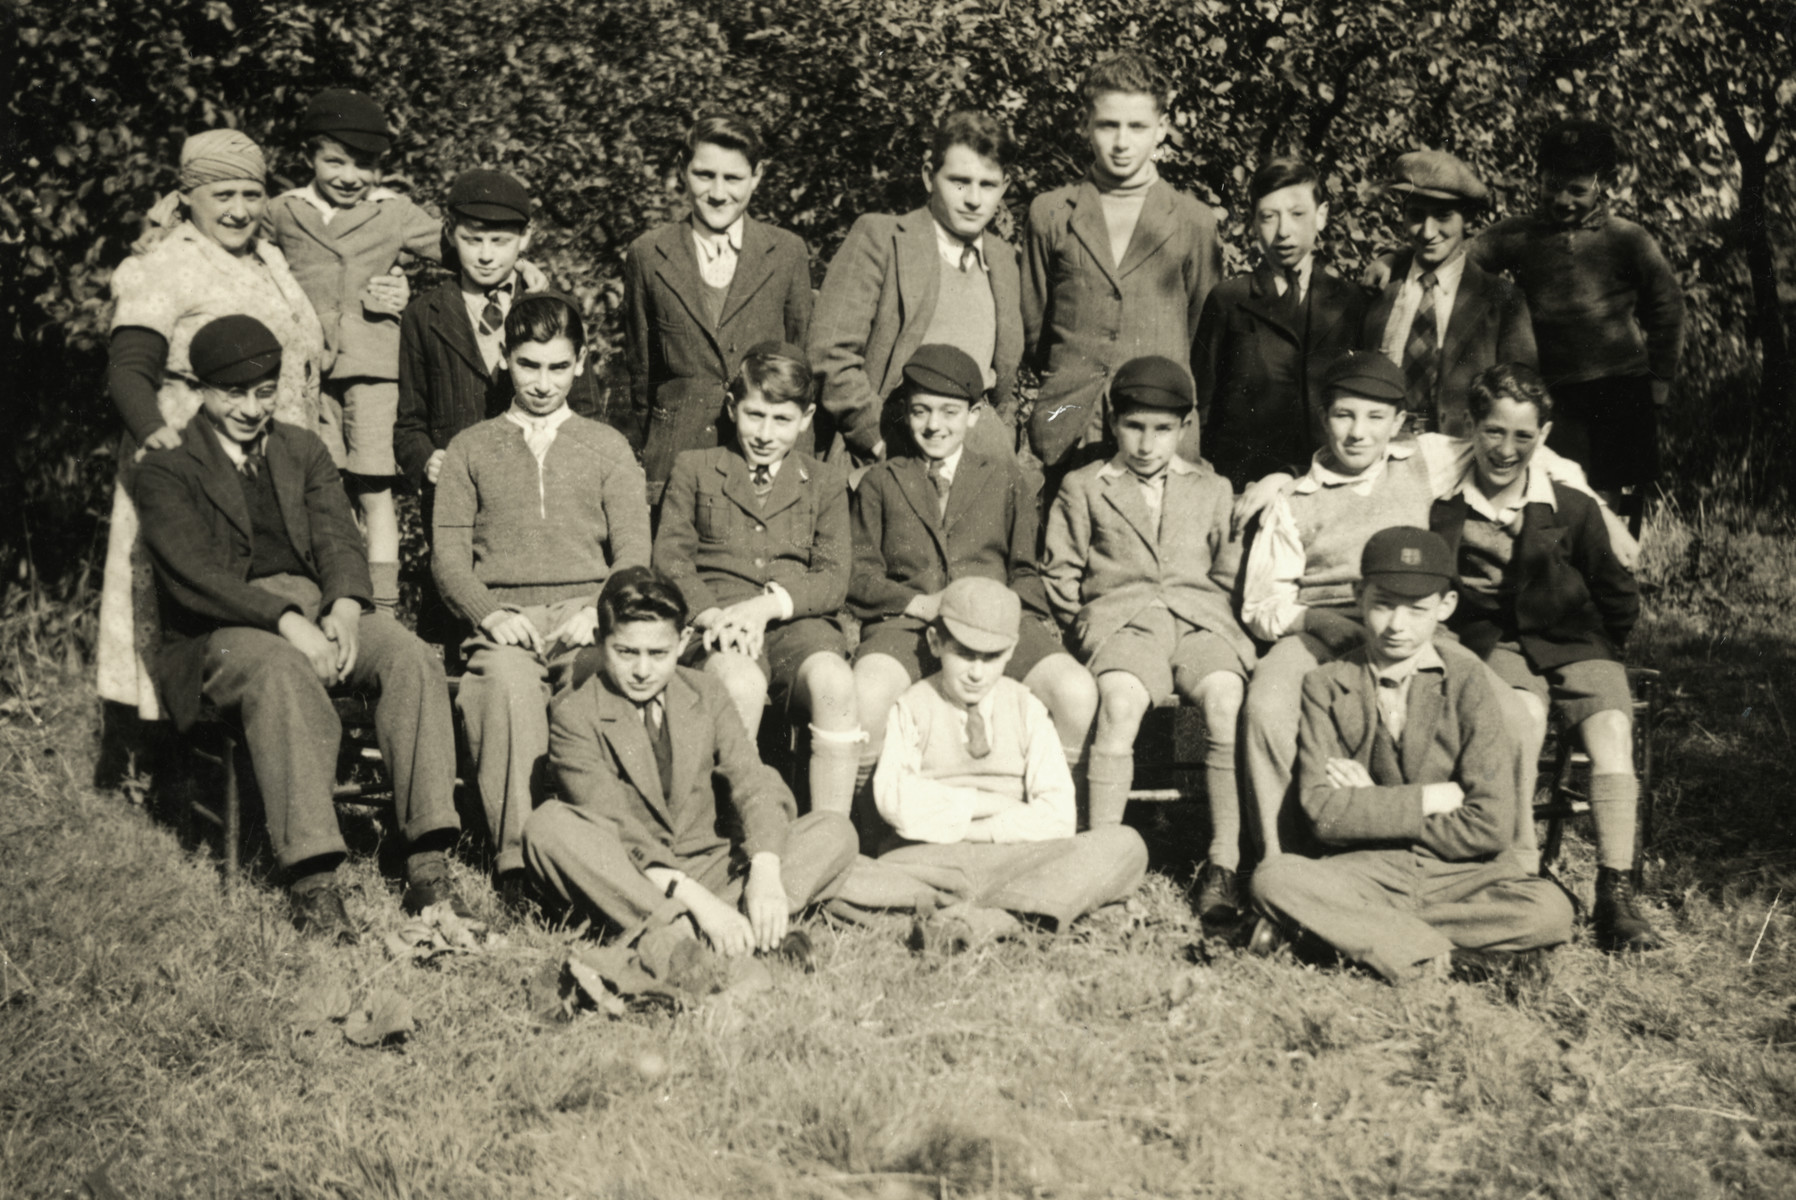 Portrait of school boys in Chase Terrace near Birmingham.

Gus Meyer who had come to England on a Kindertransport is in the top row, fourth from the left.